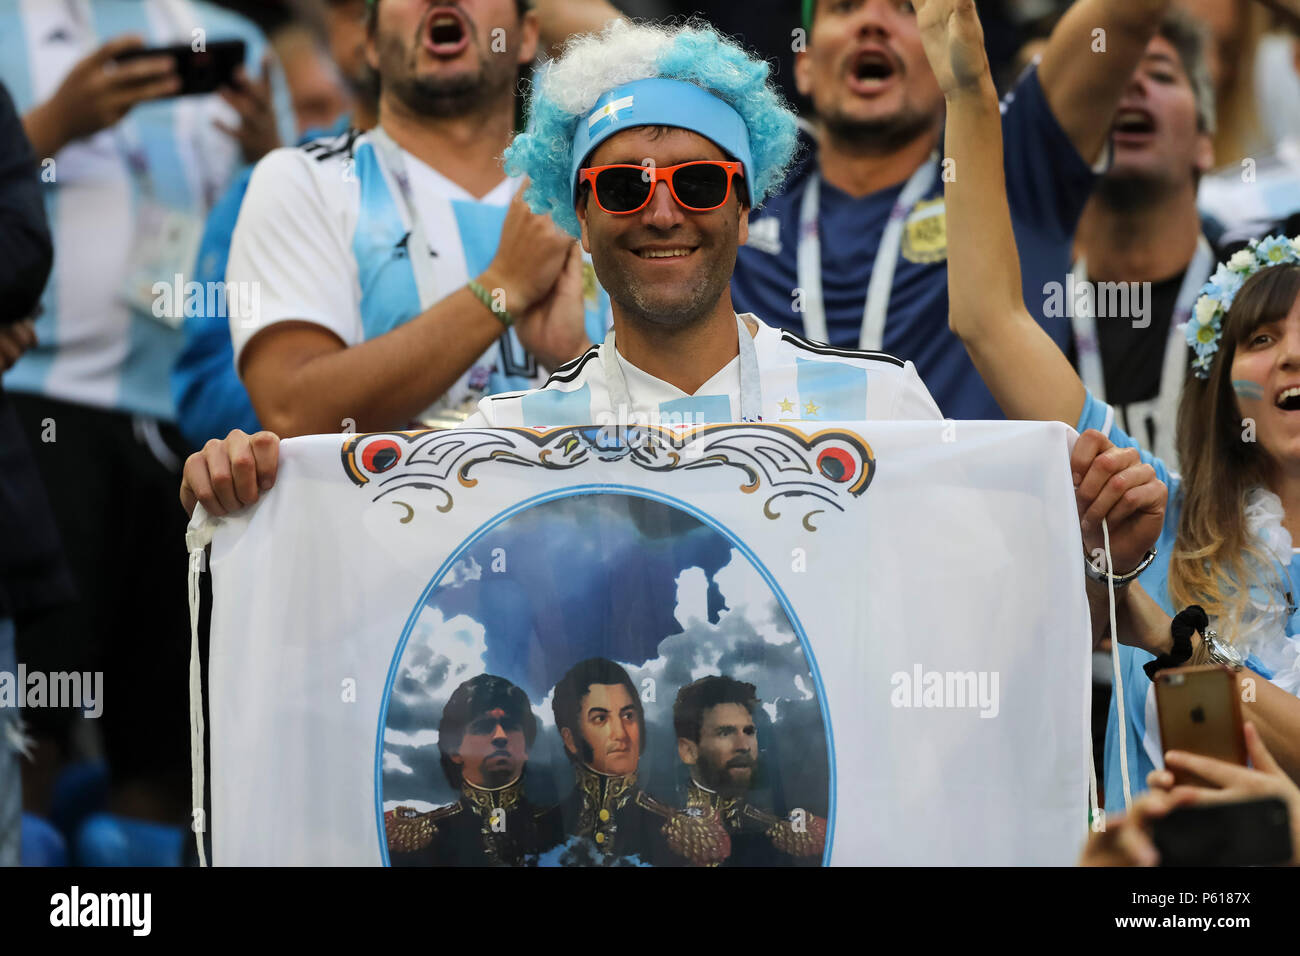 St Petersburg, Russia. 26th Jun, 2018. Argentina fans before the 2018 FIFA World Cup Group D match between Nigeria and Argentina at Saint Petersburg Stadium on June 26th 2018 in Saint Petersburg, Russia. (Photo by Daniel Chesterton/phcimages.com) Credit: PHC Images/Alamy Live News Stock Photo